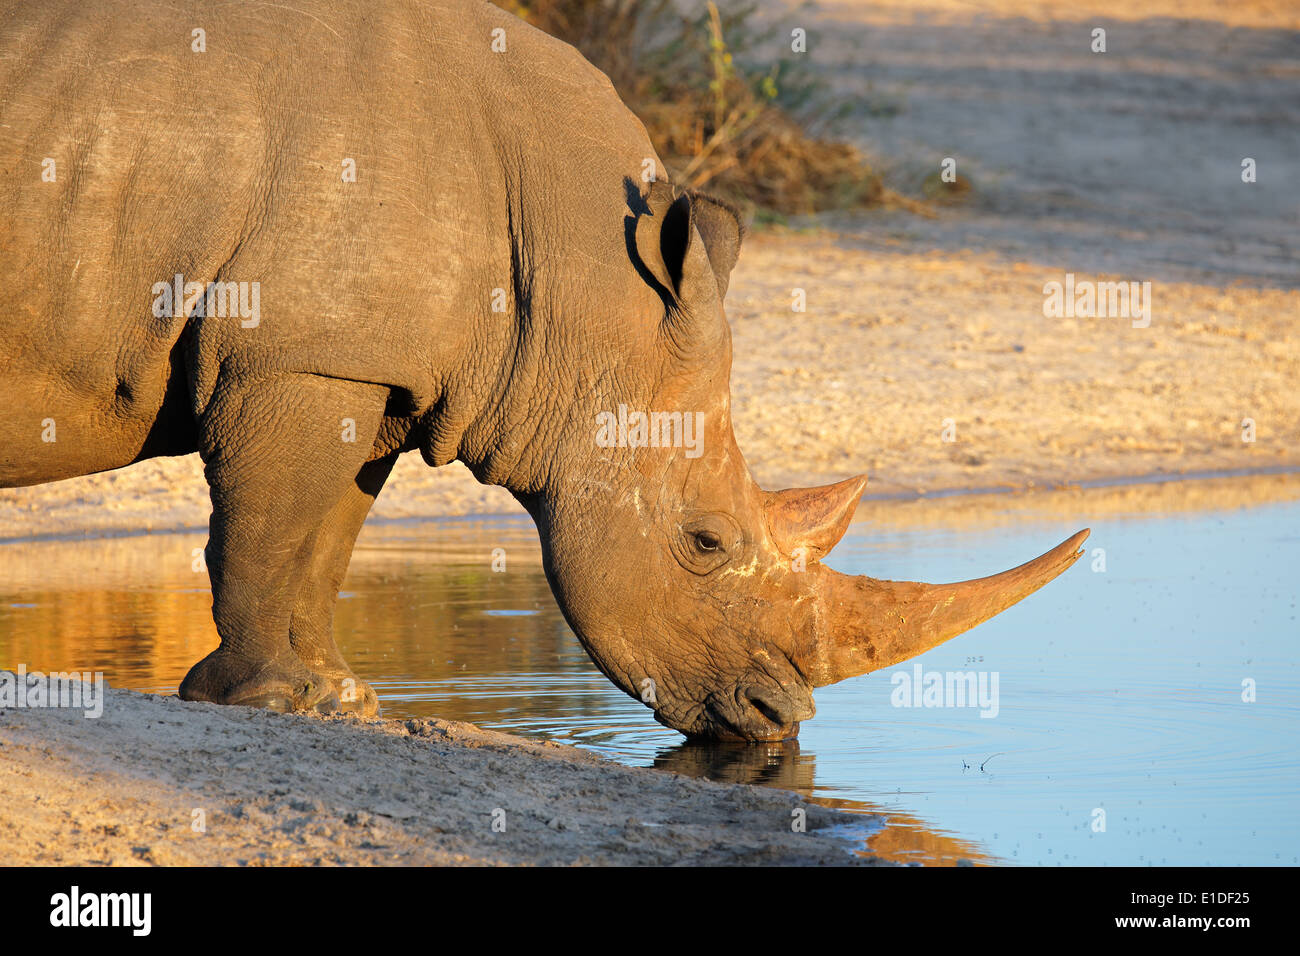 Portrait of a white rhinoceros (Ceratotherium simum) drinking water, South Africa Stock Photo